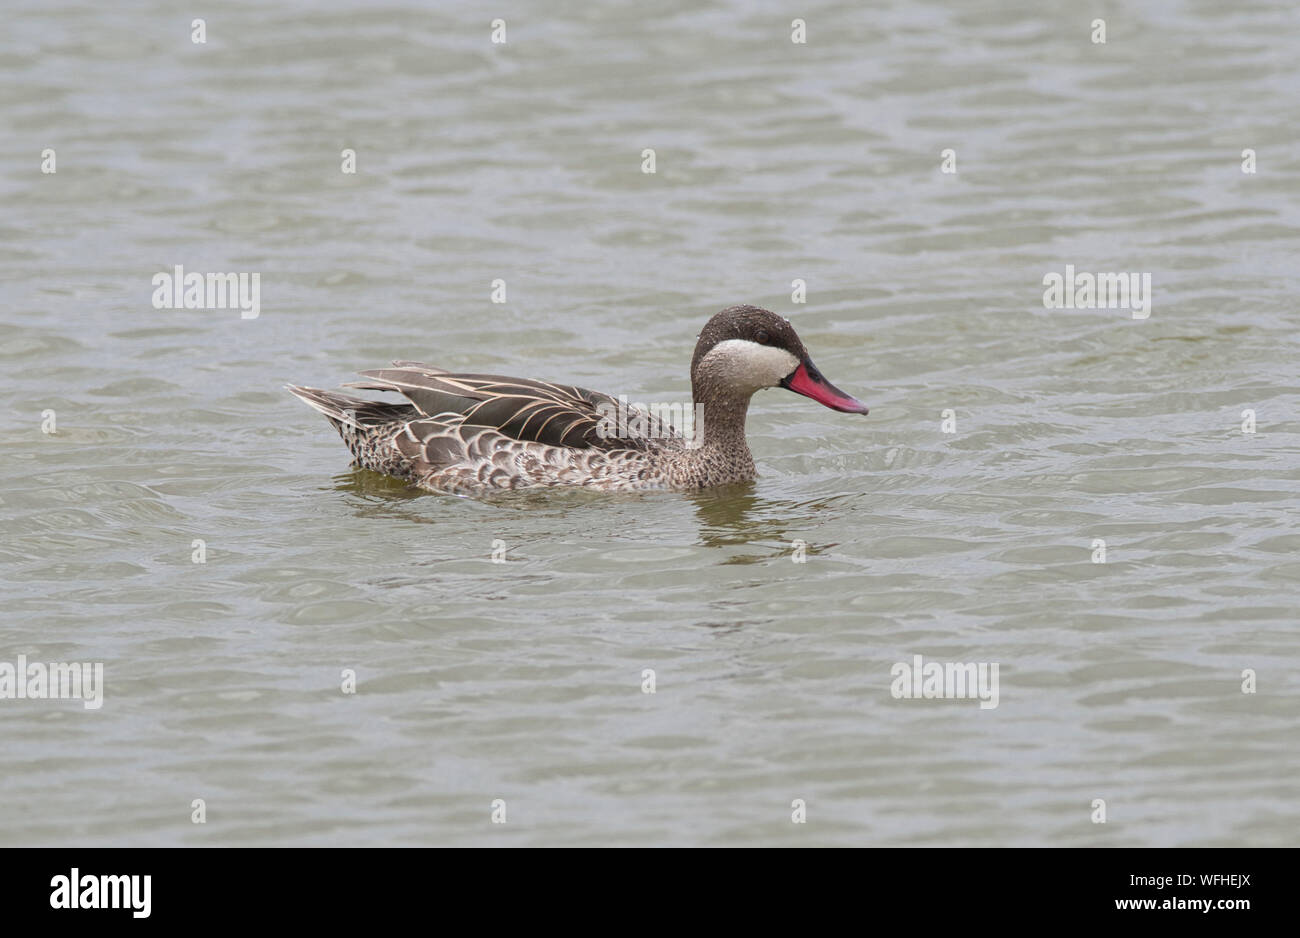 Red-billed teal (Anas erythrorhyncha), formerly known as the red-billed duck  Stock Photo - Alamy